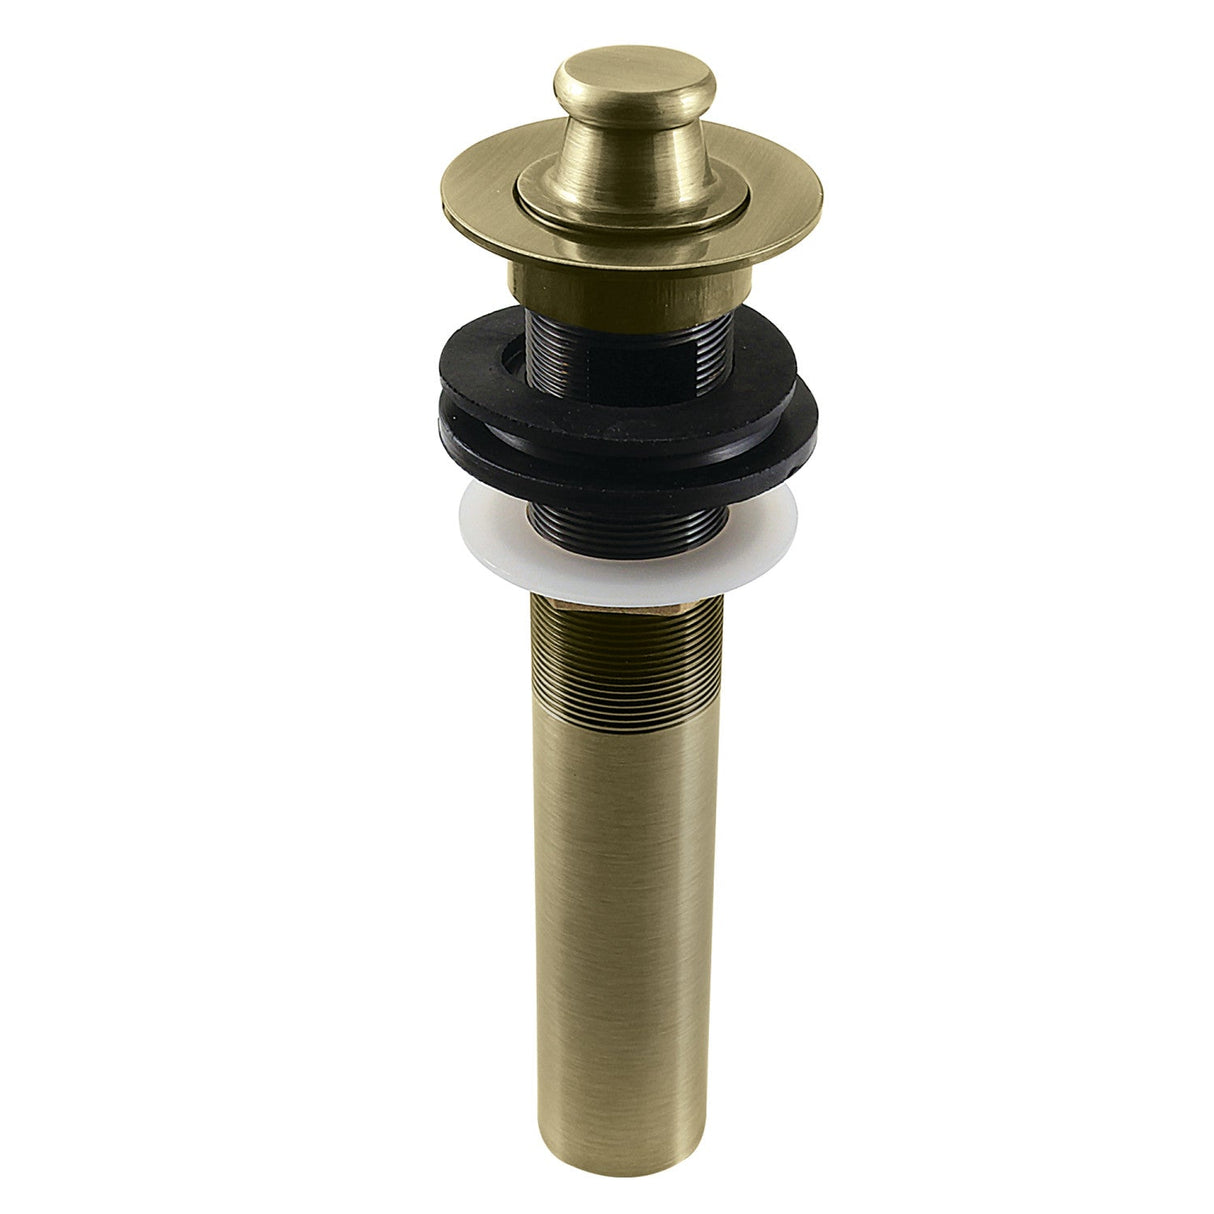 Fauceture KB3003 Brass Lift and Turn Bathroom Sink Drain with Overflow, 17 Gauge, Antique Brass